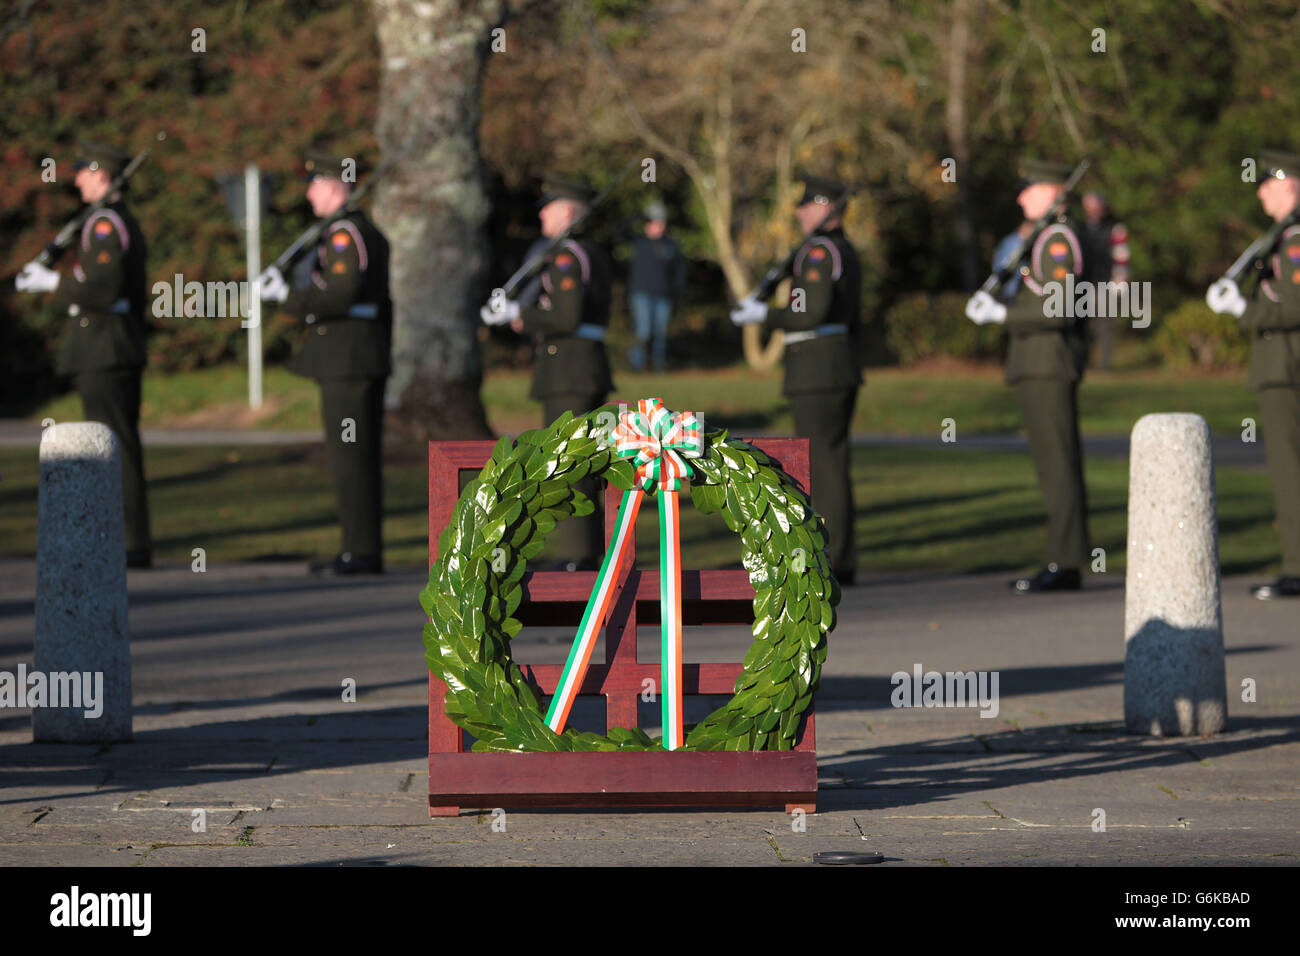 The commemorative wreath-laying ceremony for the former United States President John F Kennedy, on the 50th anniversary of his death at the JFK Memorial Park and Arboretum in New Ross, Co Wexford, the ancestral home of President Kennedy. Stock Photo